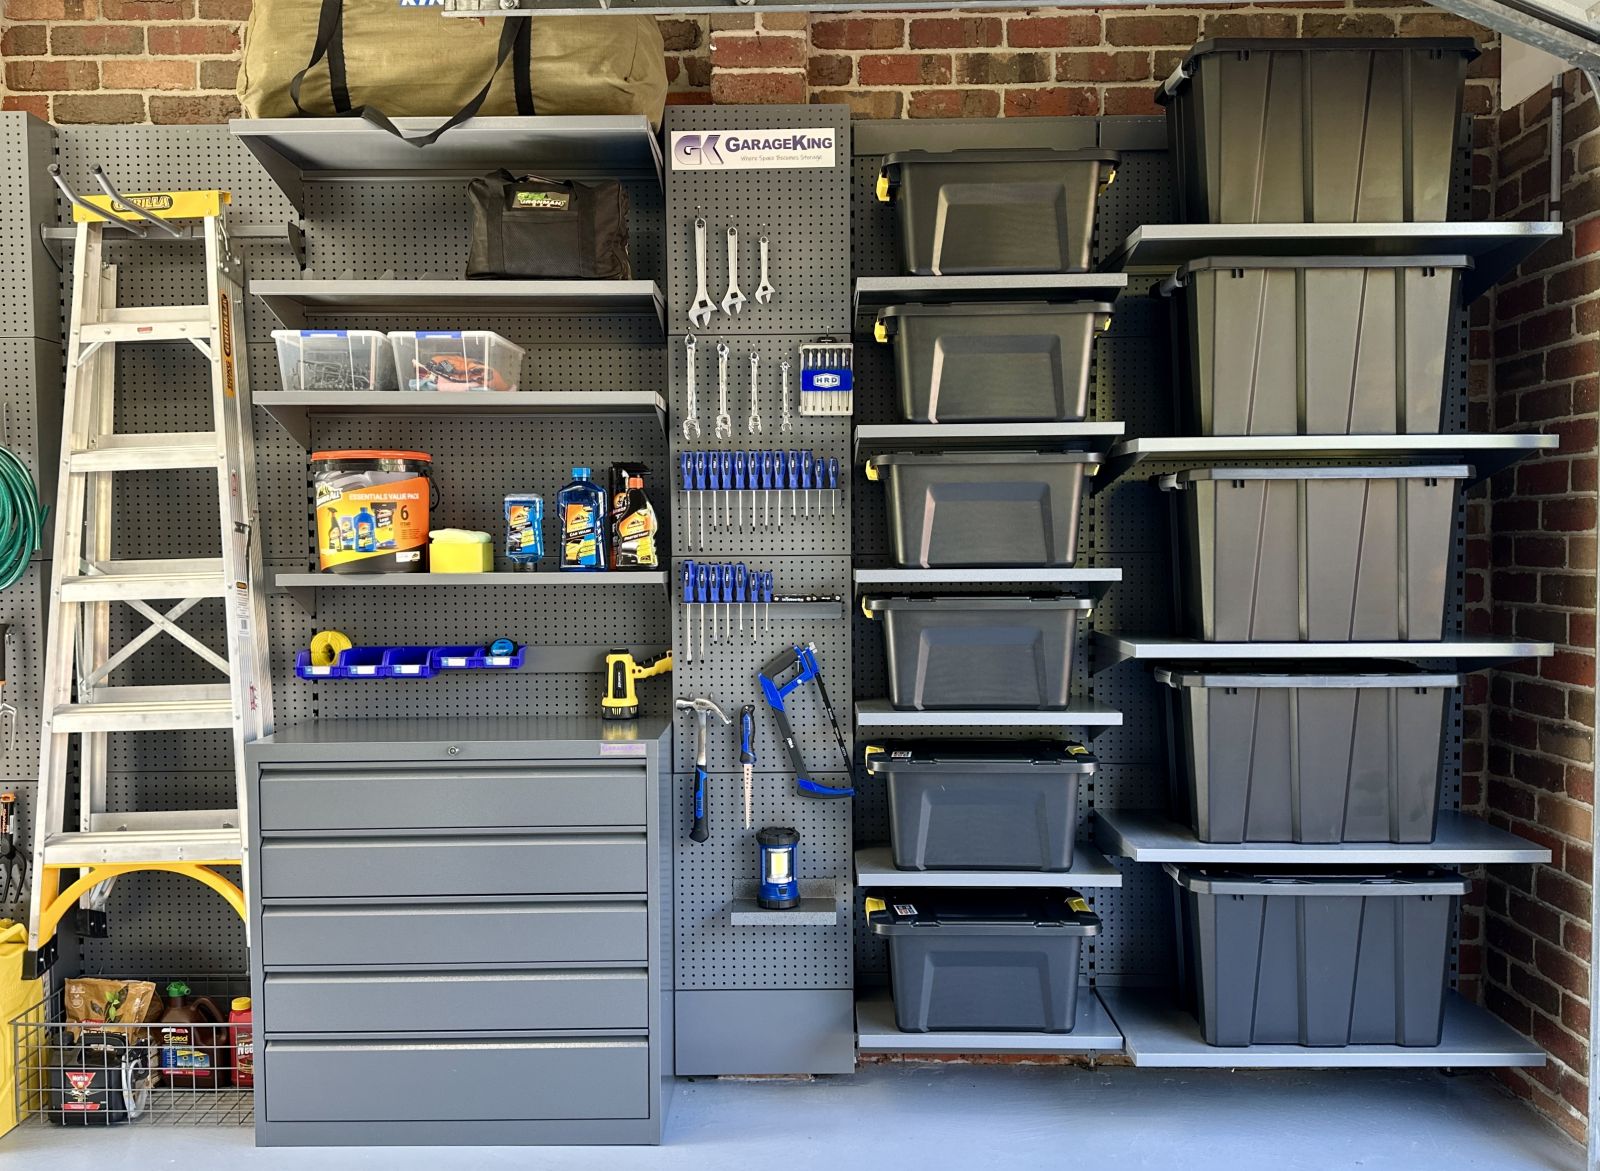 Built-in garage storage system with storage shelves, drawers and hooks